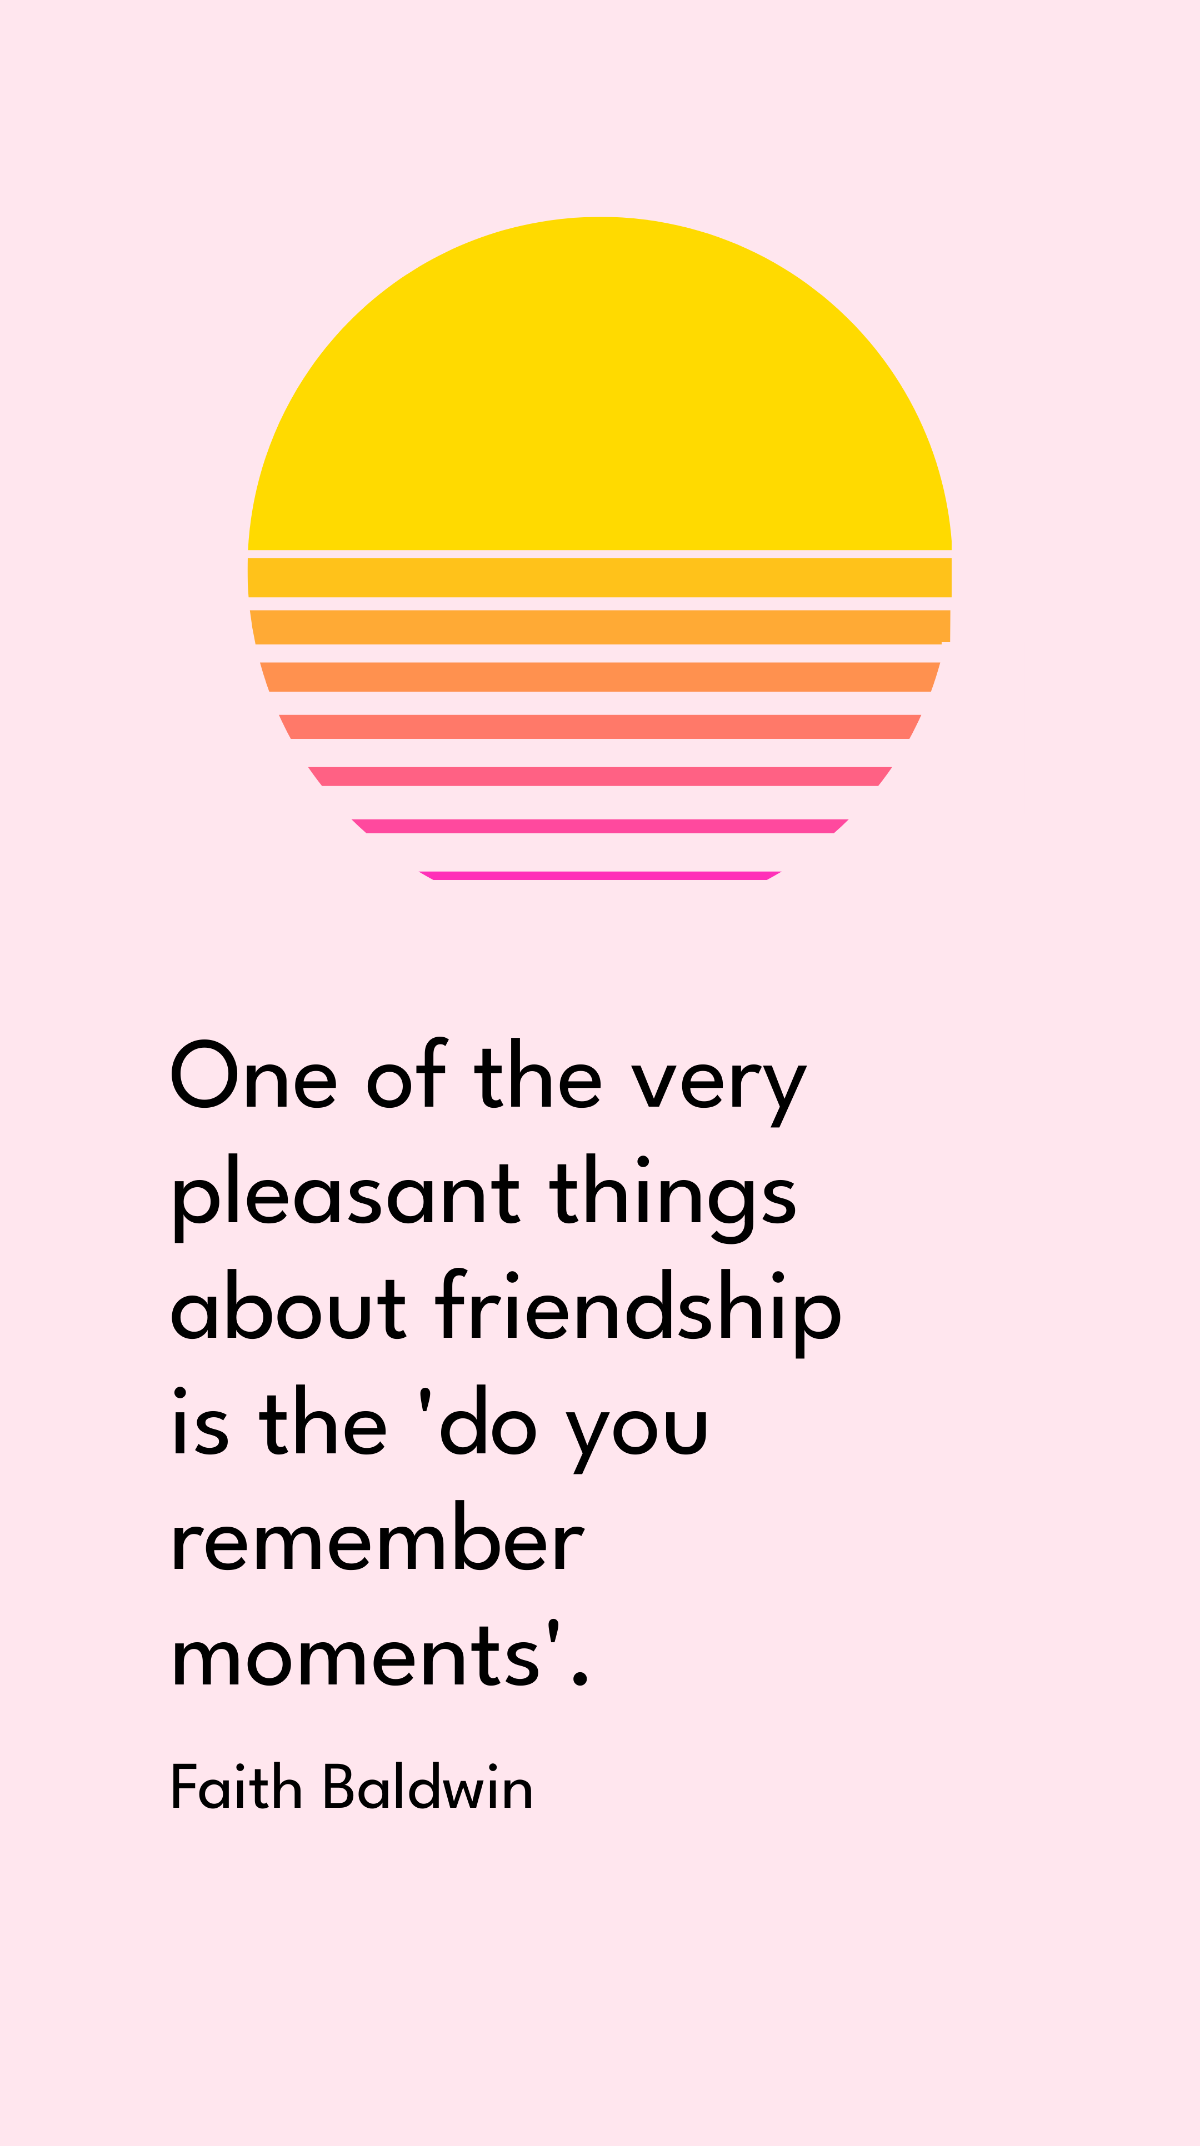 Faith Baldwin - One of the very pleasant things about friendship is the 'do you remember moments'.  Template